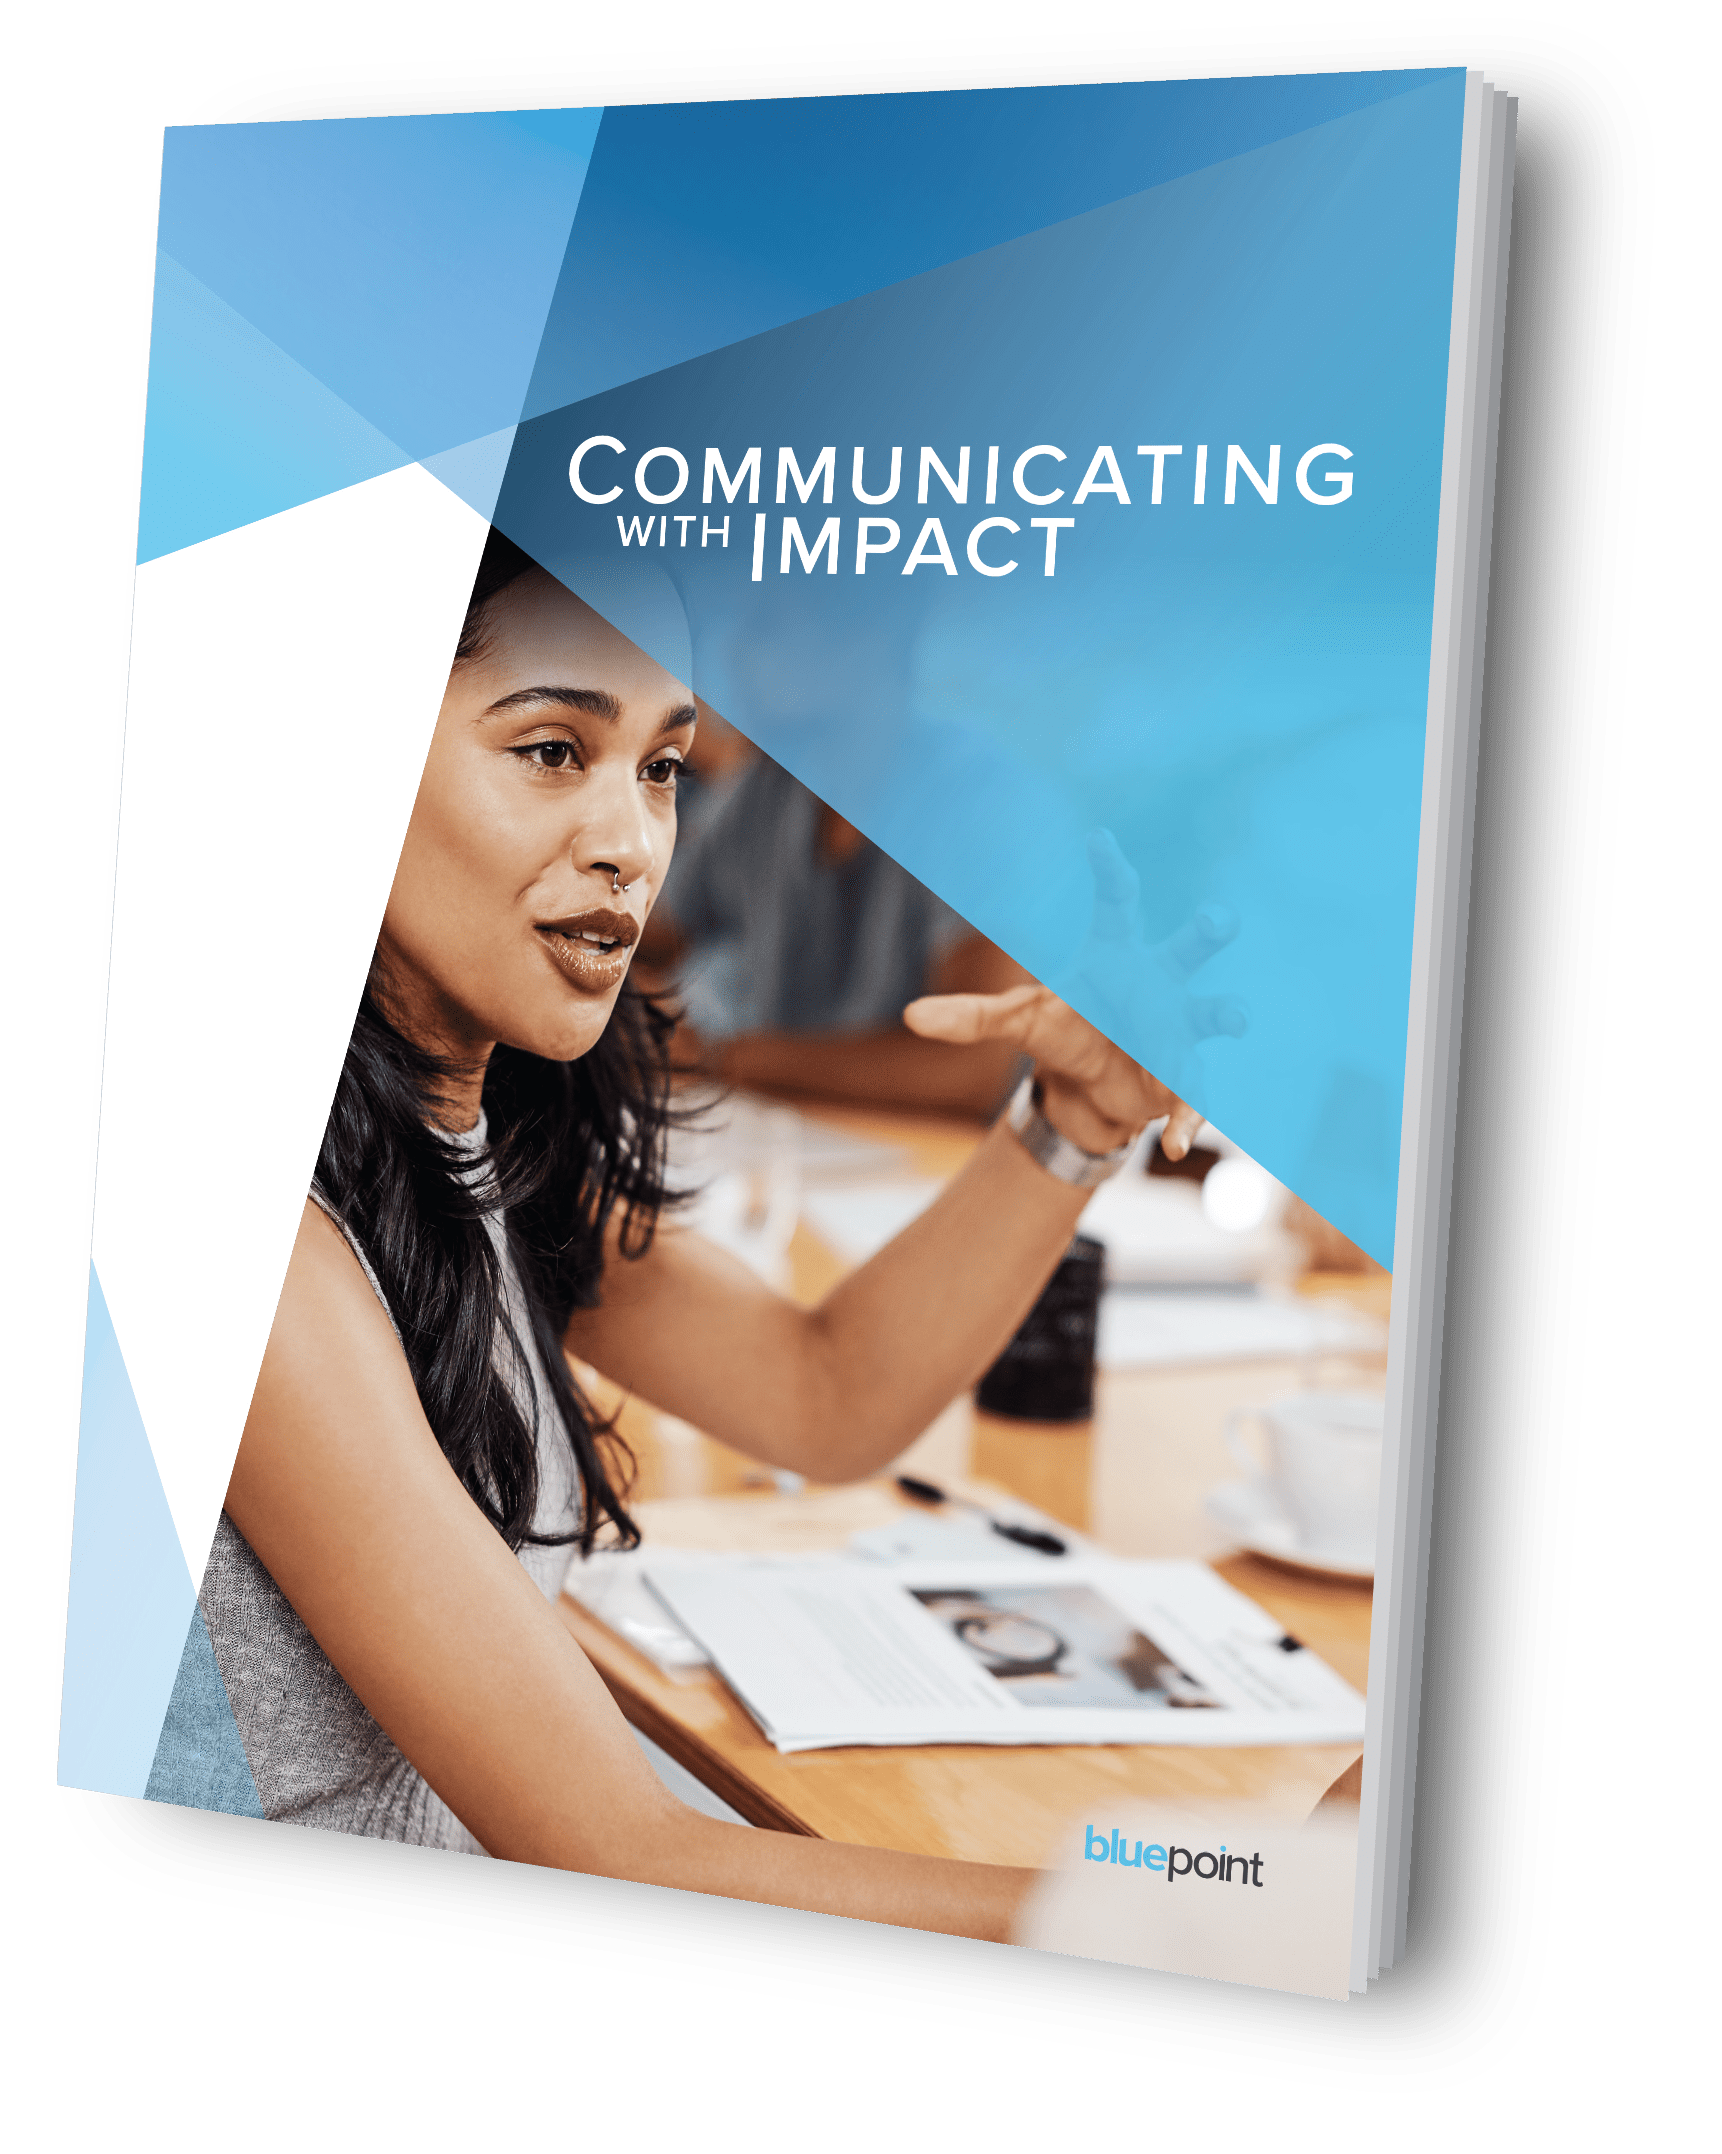 Communicating with Impact